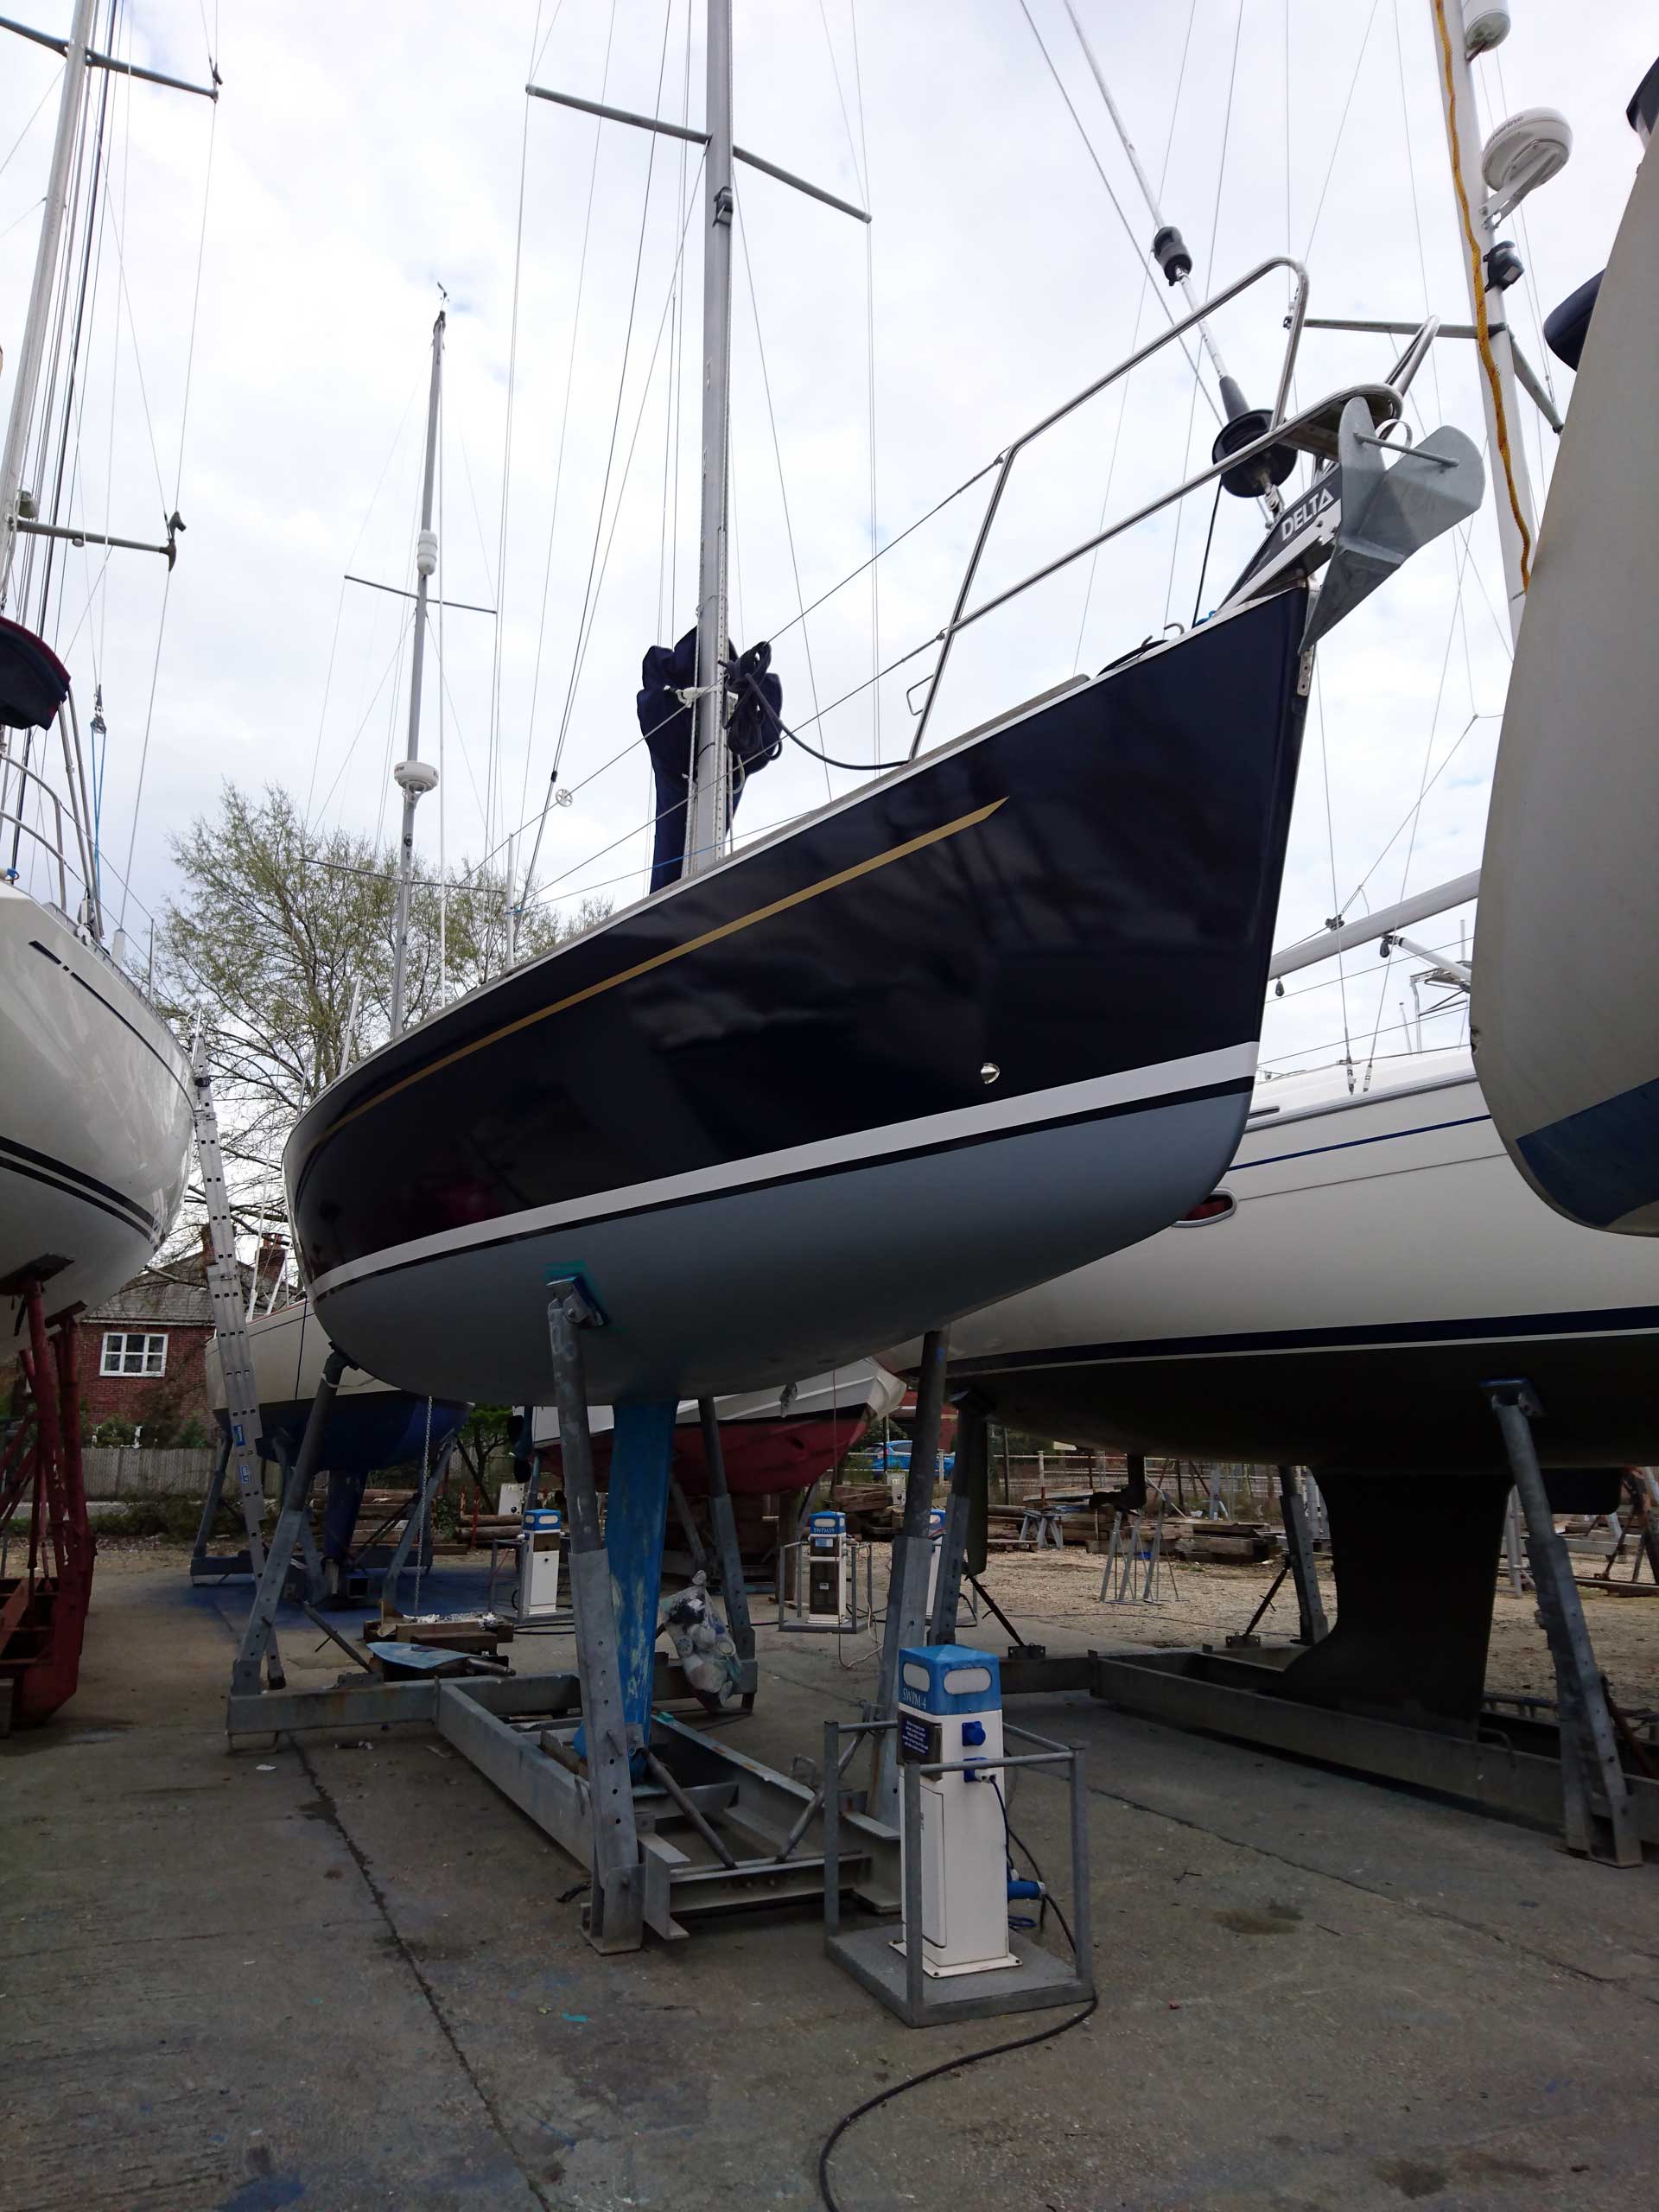 Sailing Yacht hull wrapping and stripes